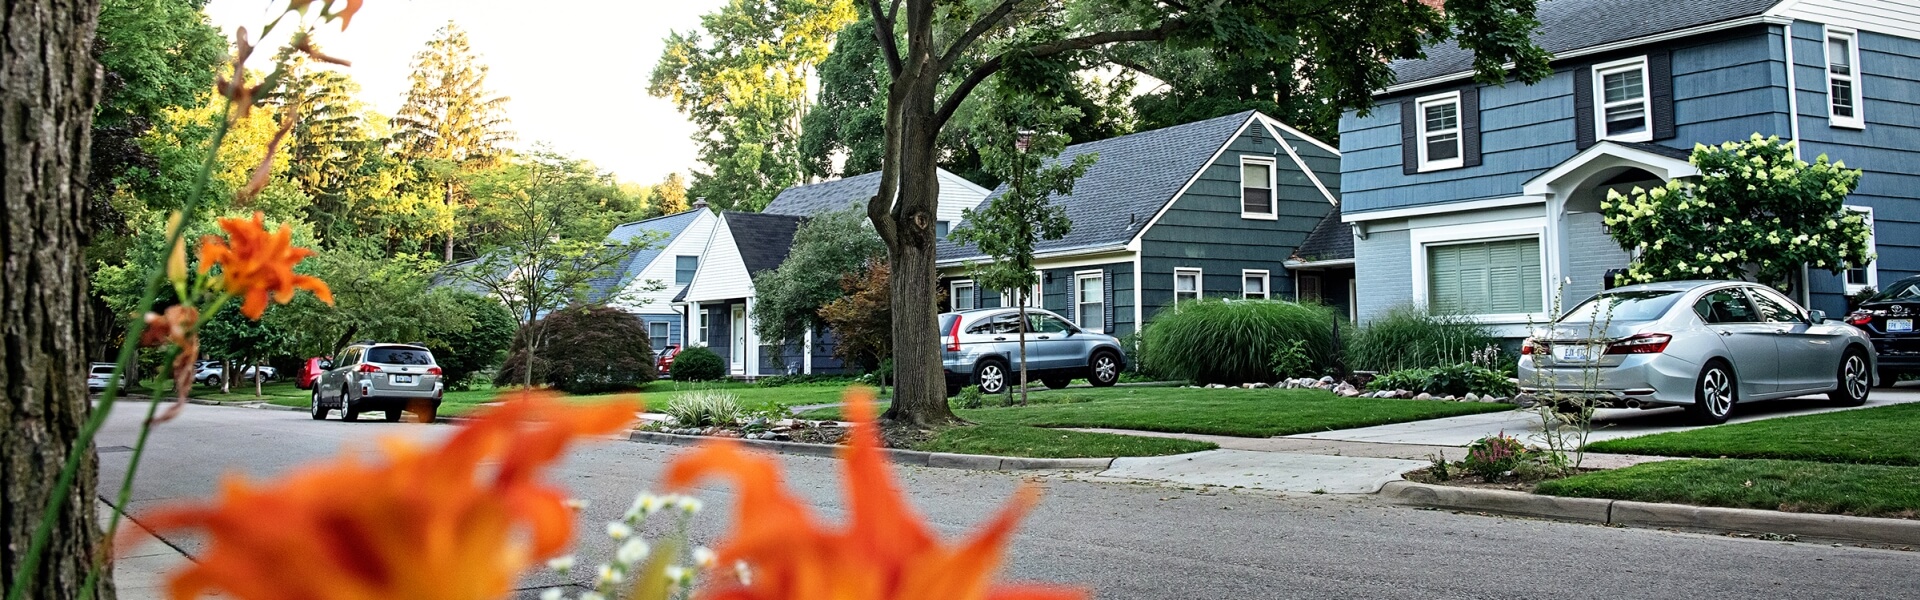 A tree-shaded suburban neighborhood in Ann Arbor lined with two-story houses.